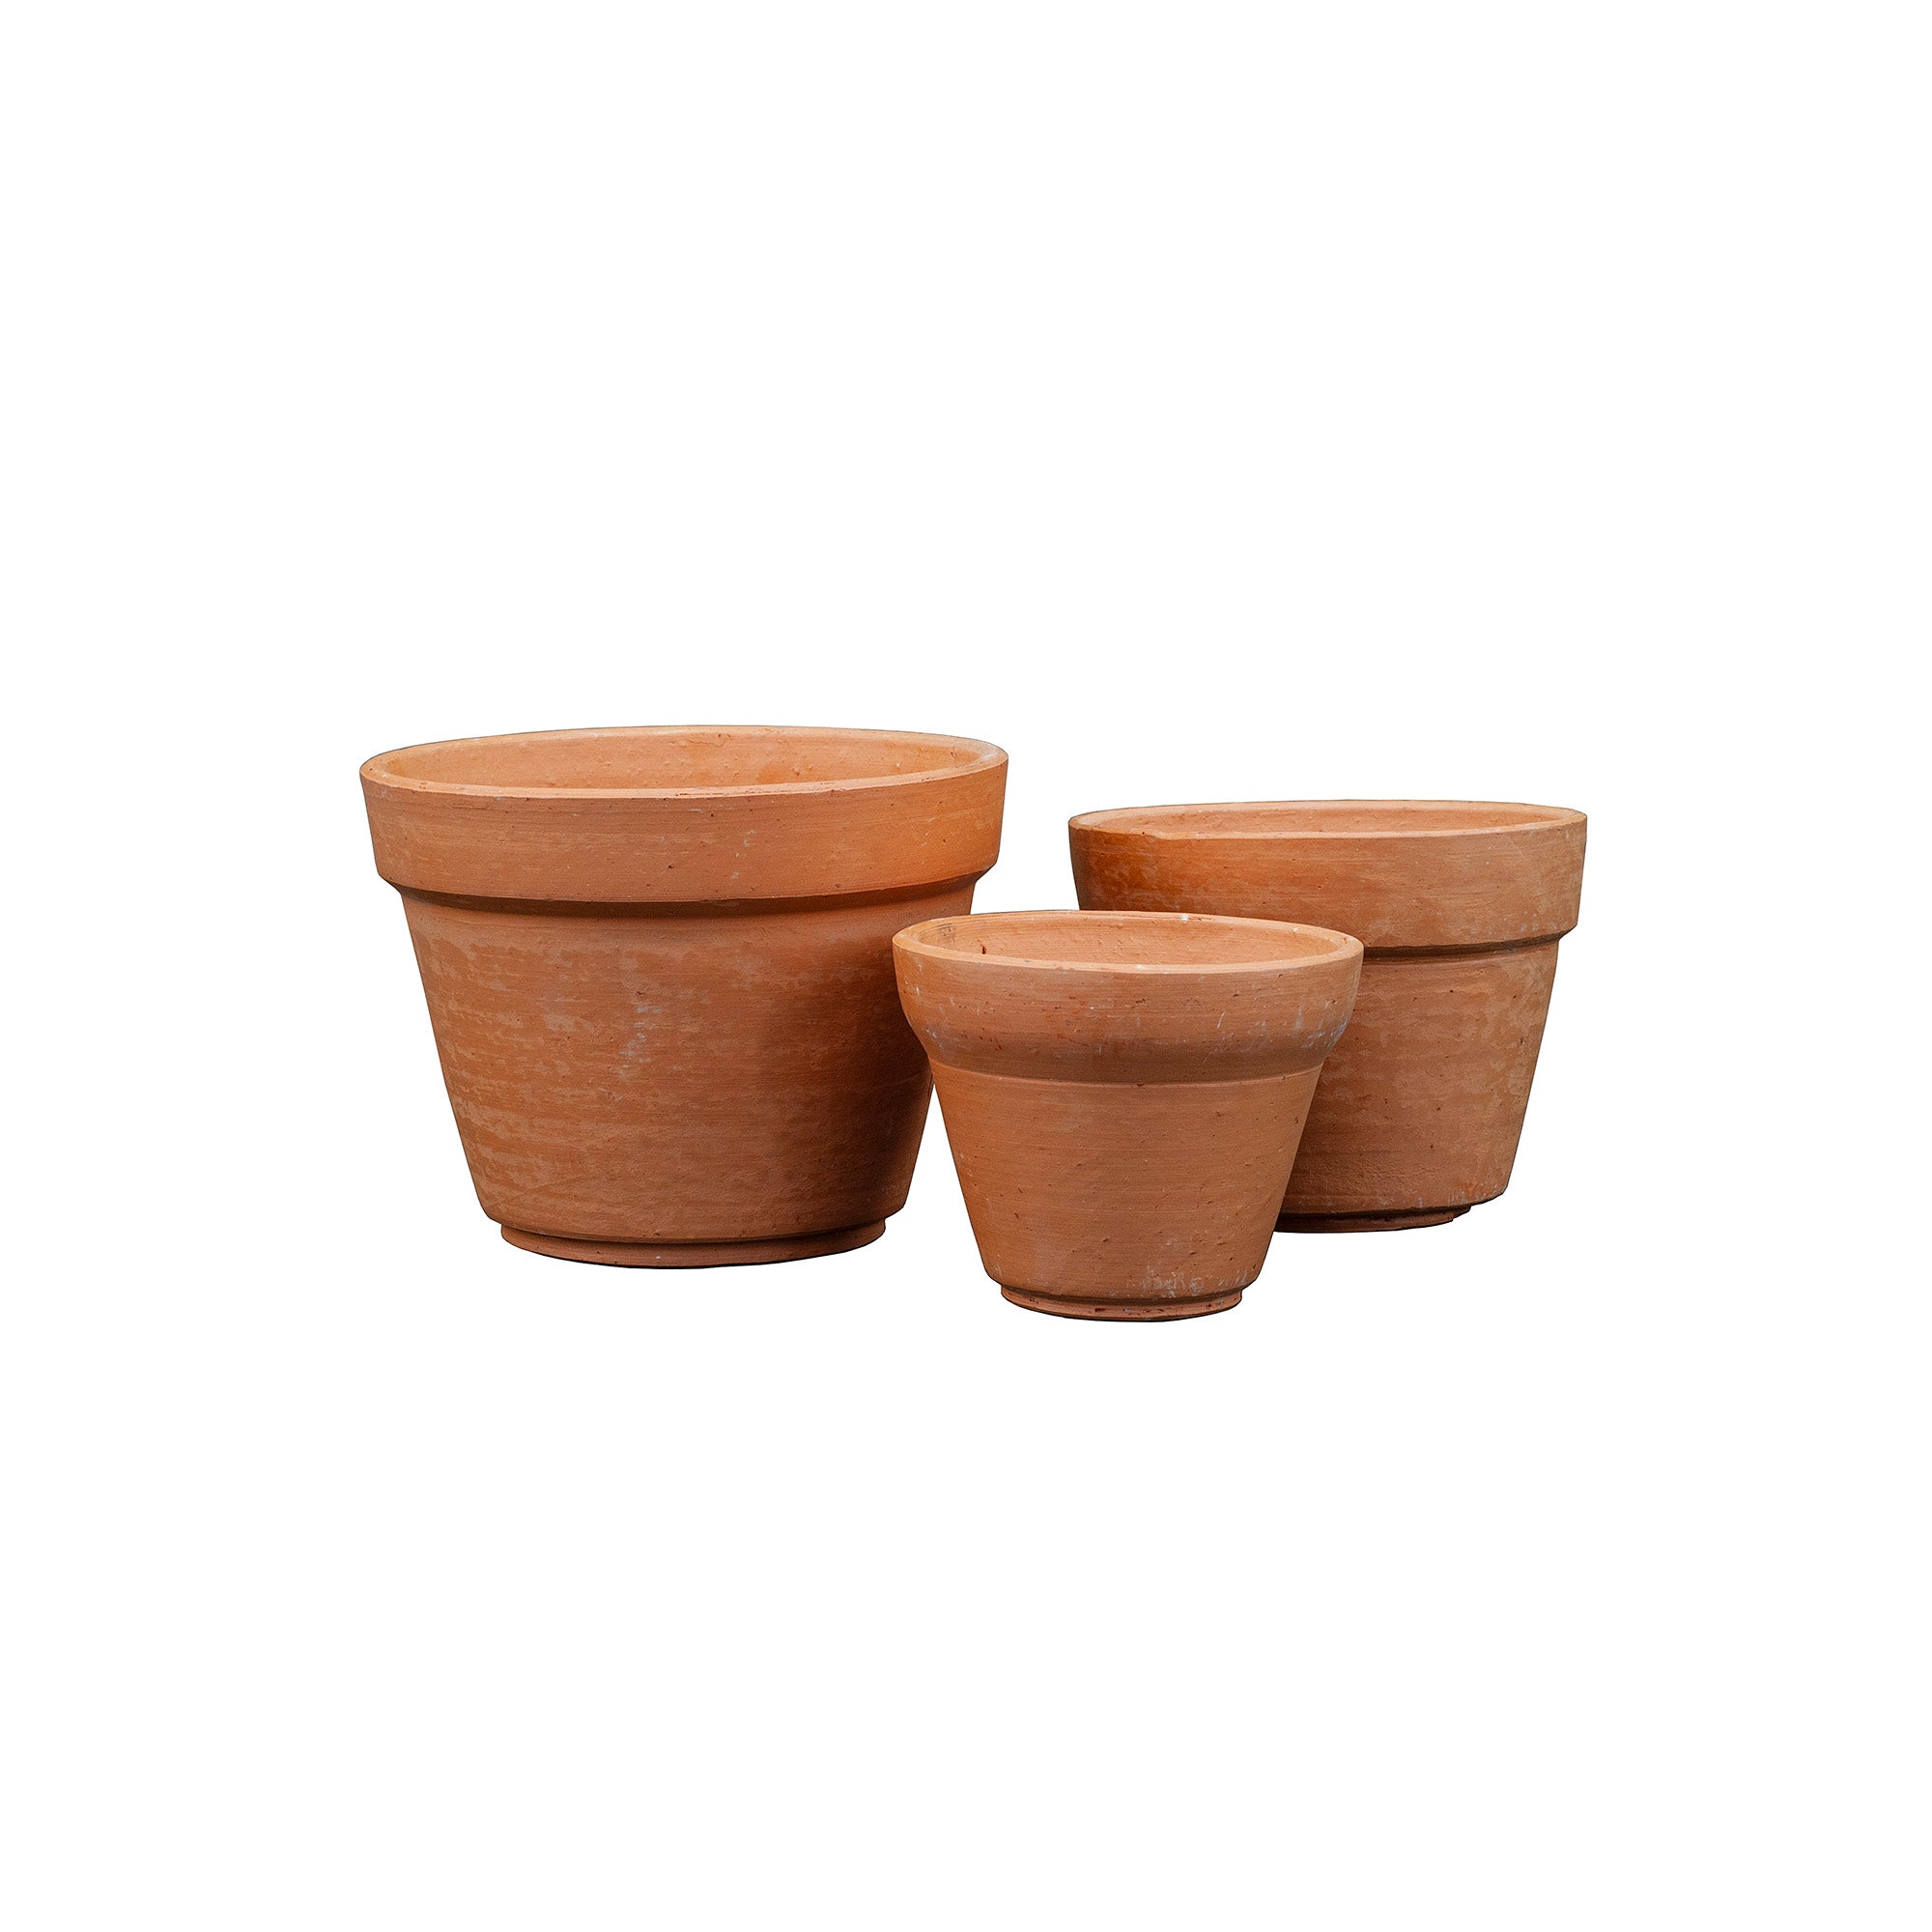 Decorative Handicrafts Hand-Painted Terra-Cotta Clay Pots for